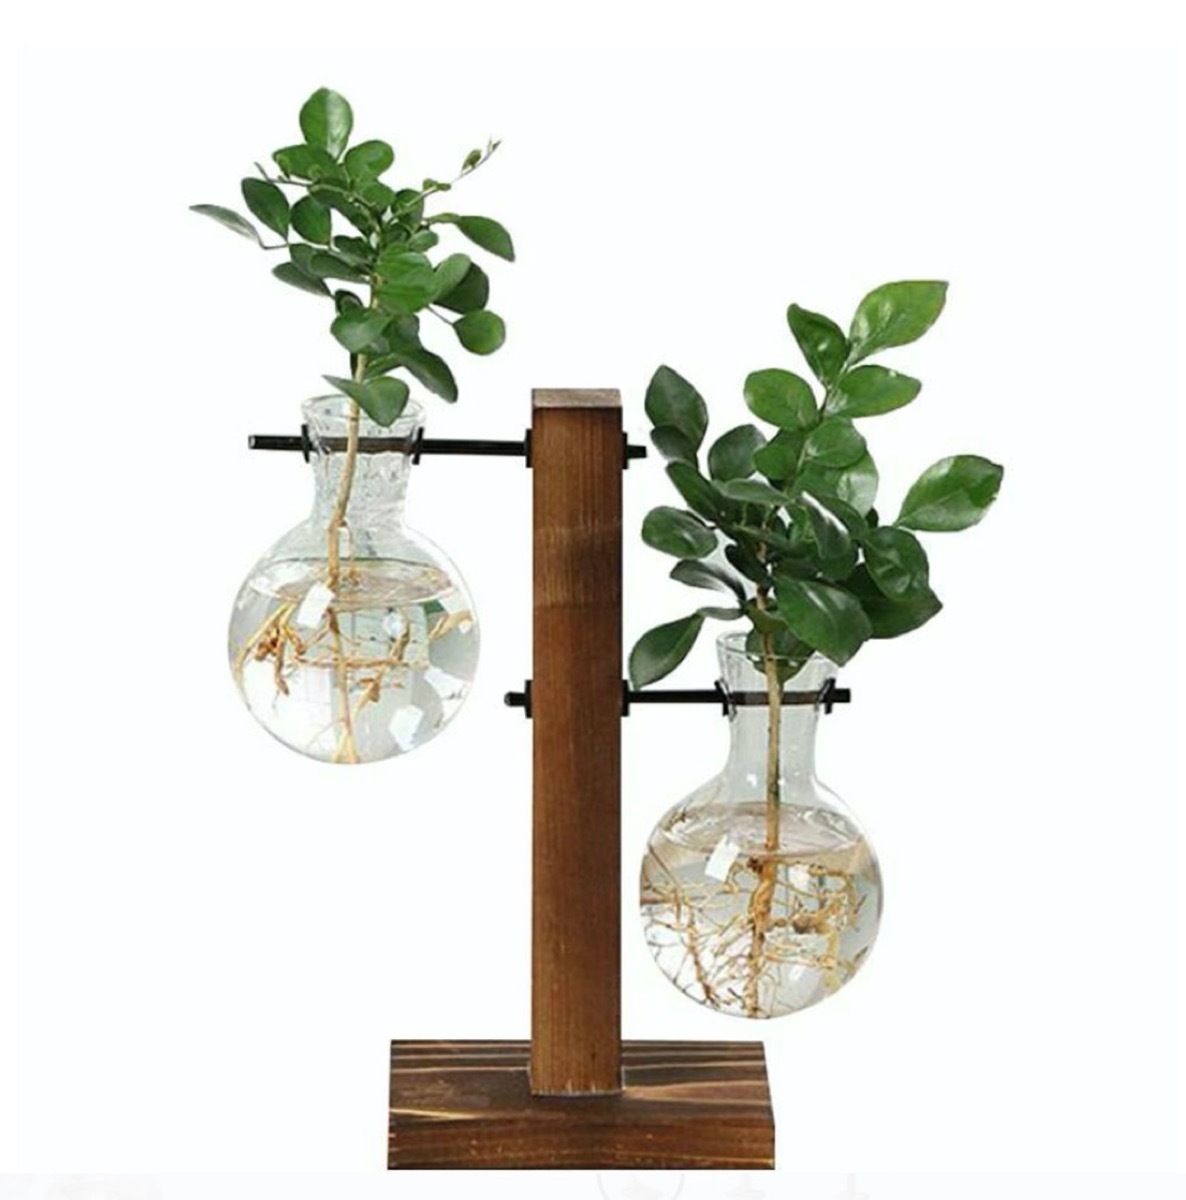 two glass vial vases in wooden stand